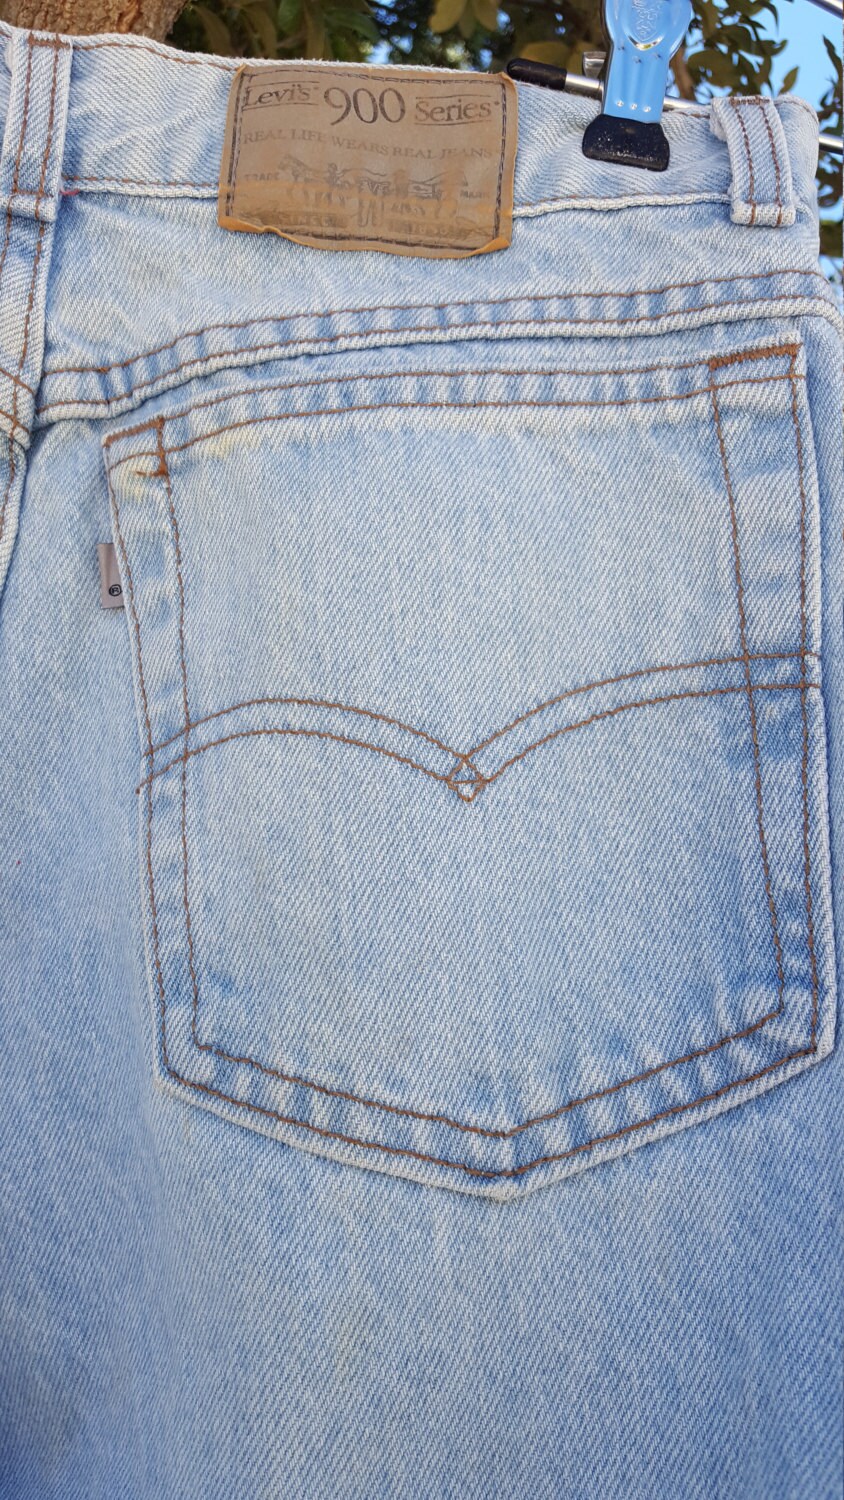 Levi's 900 Series / High Waisted Jeans / Vintage Clothing / Retro Jeans /  Denim Pants / Vintage Clothing